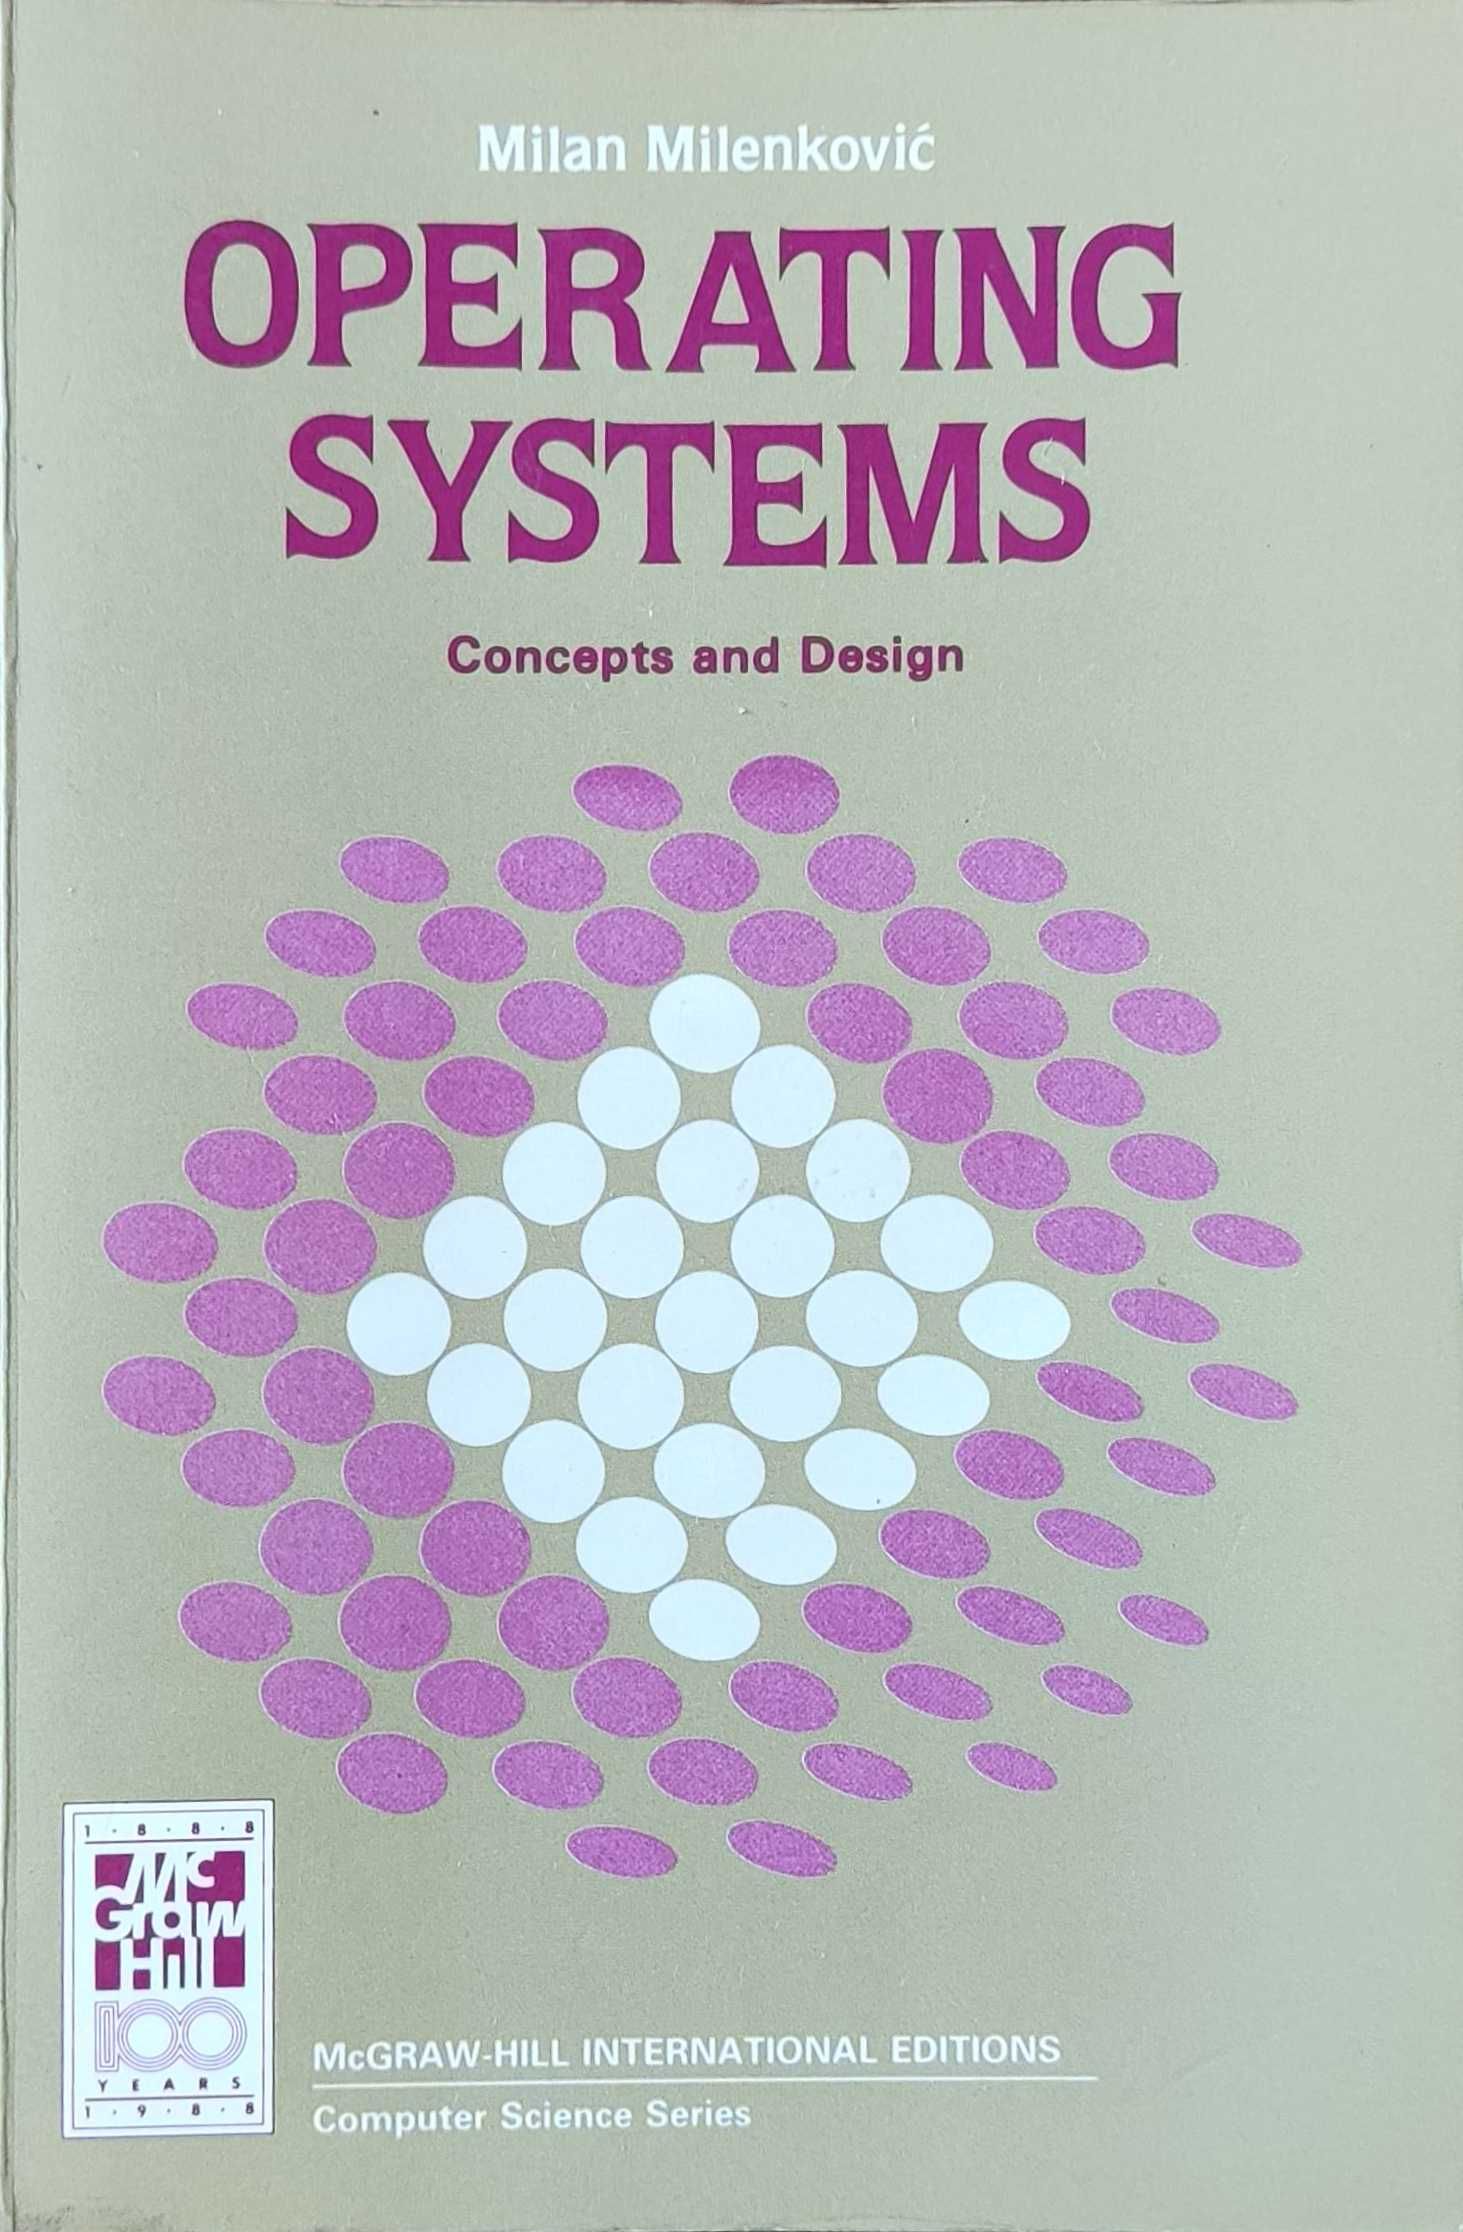 Operating Systems - Concepts and Design - McGraw Hill